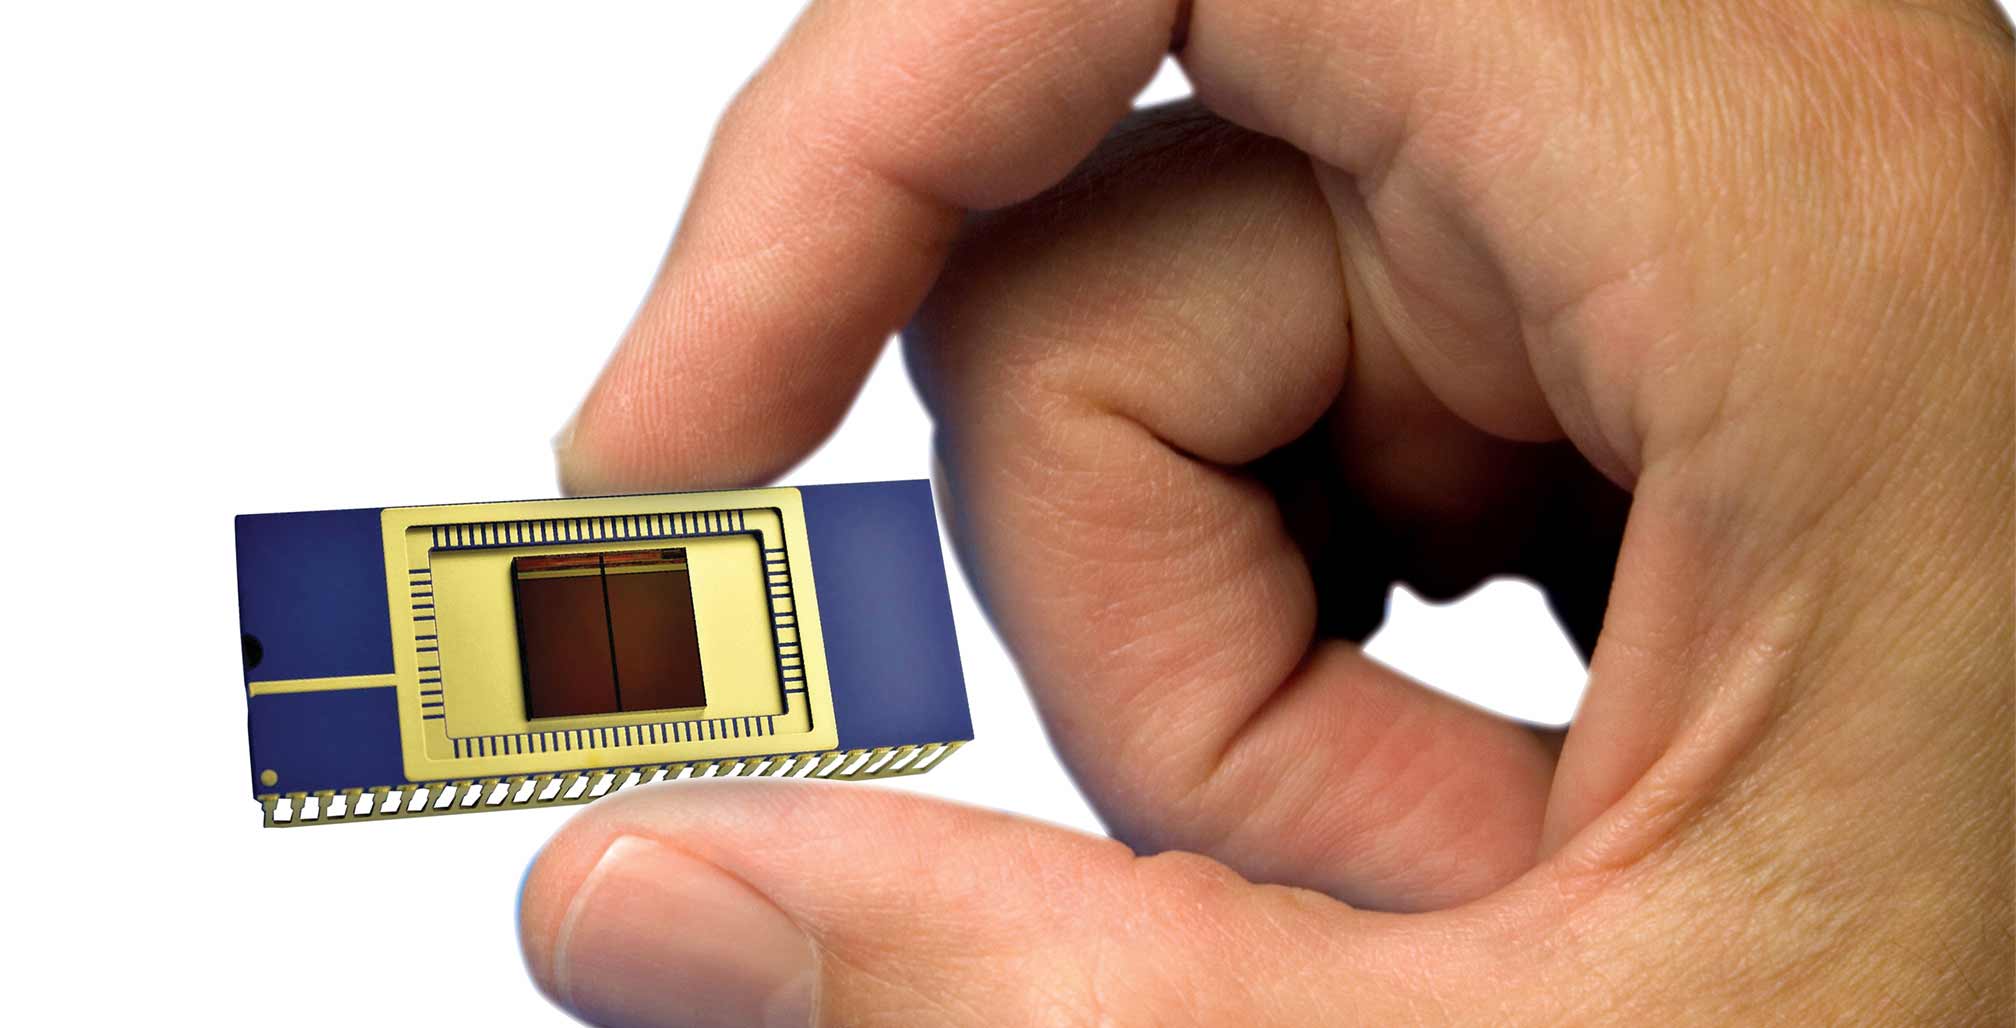 The Ticker: China’s Strategic Transformation in the Chip Industry